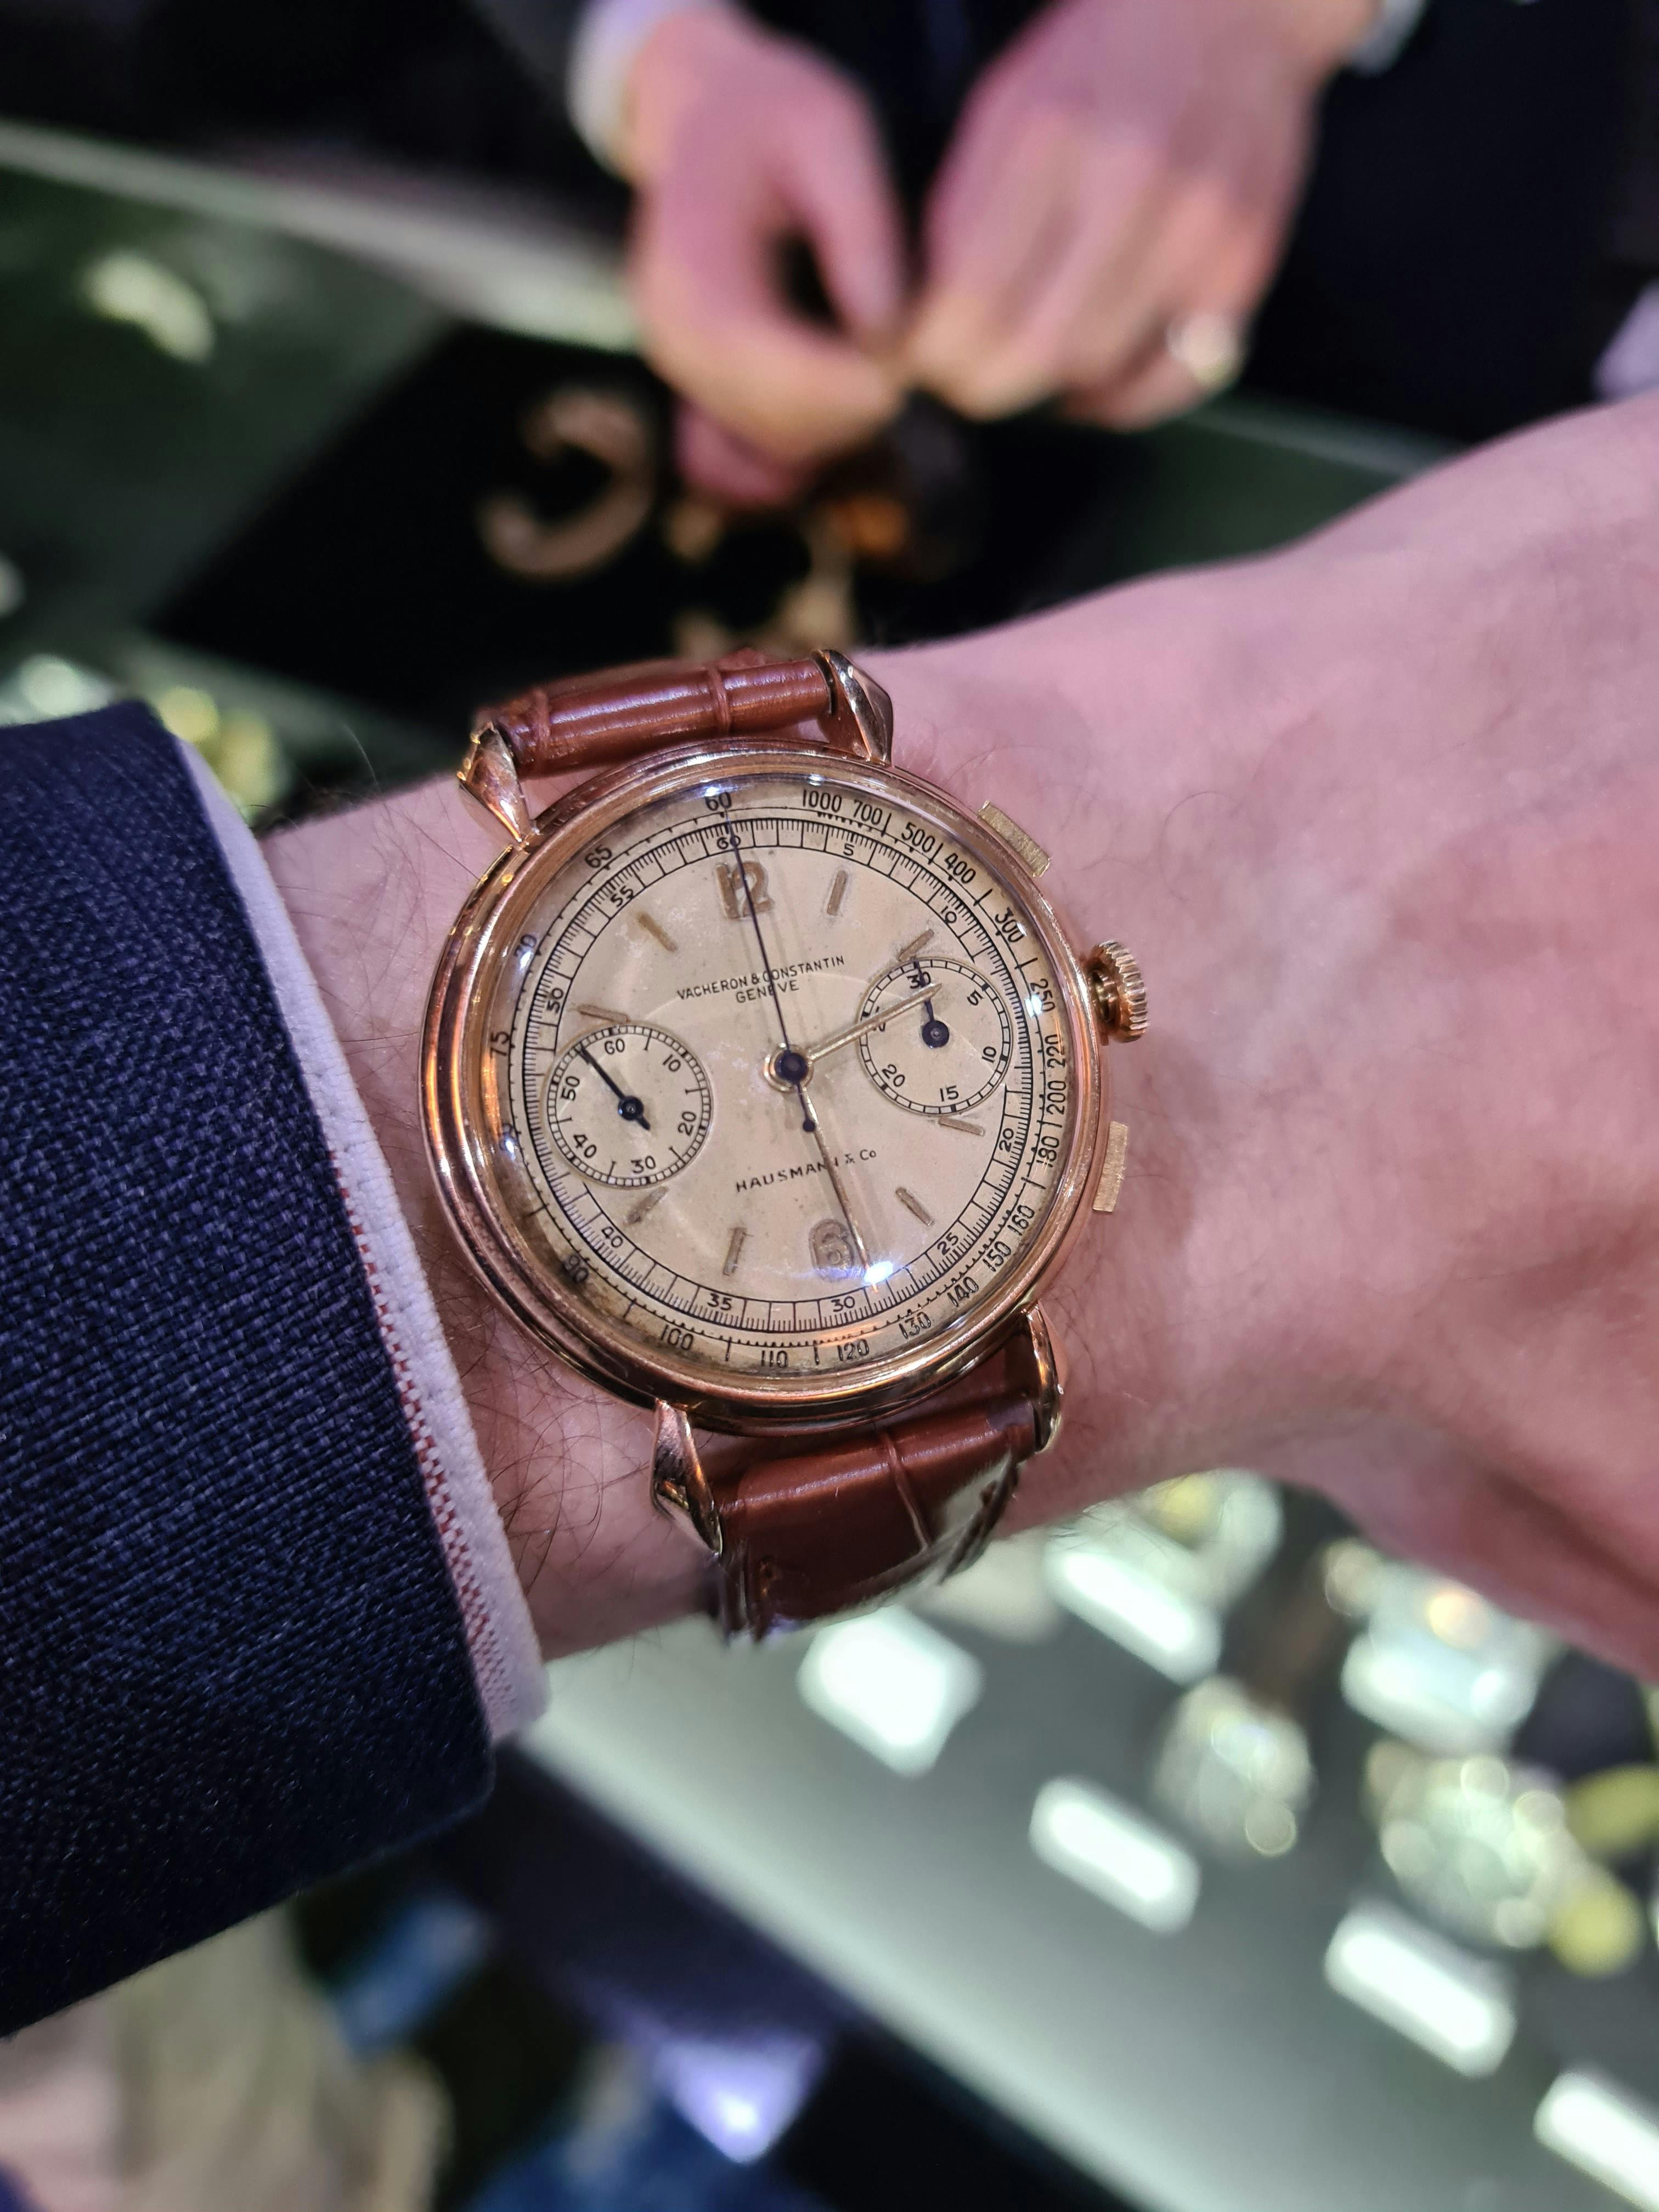 A specialist vintage watch store can be a great place to buy important vintage watches